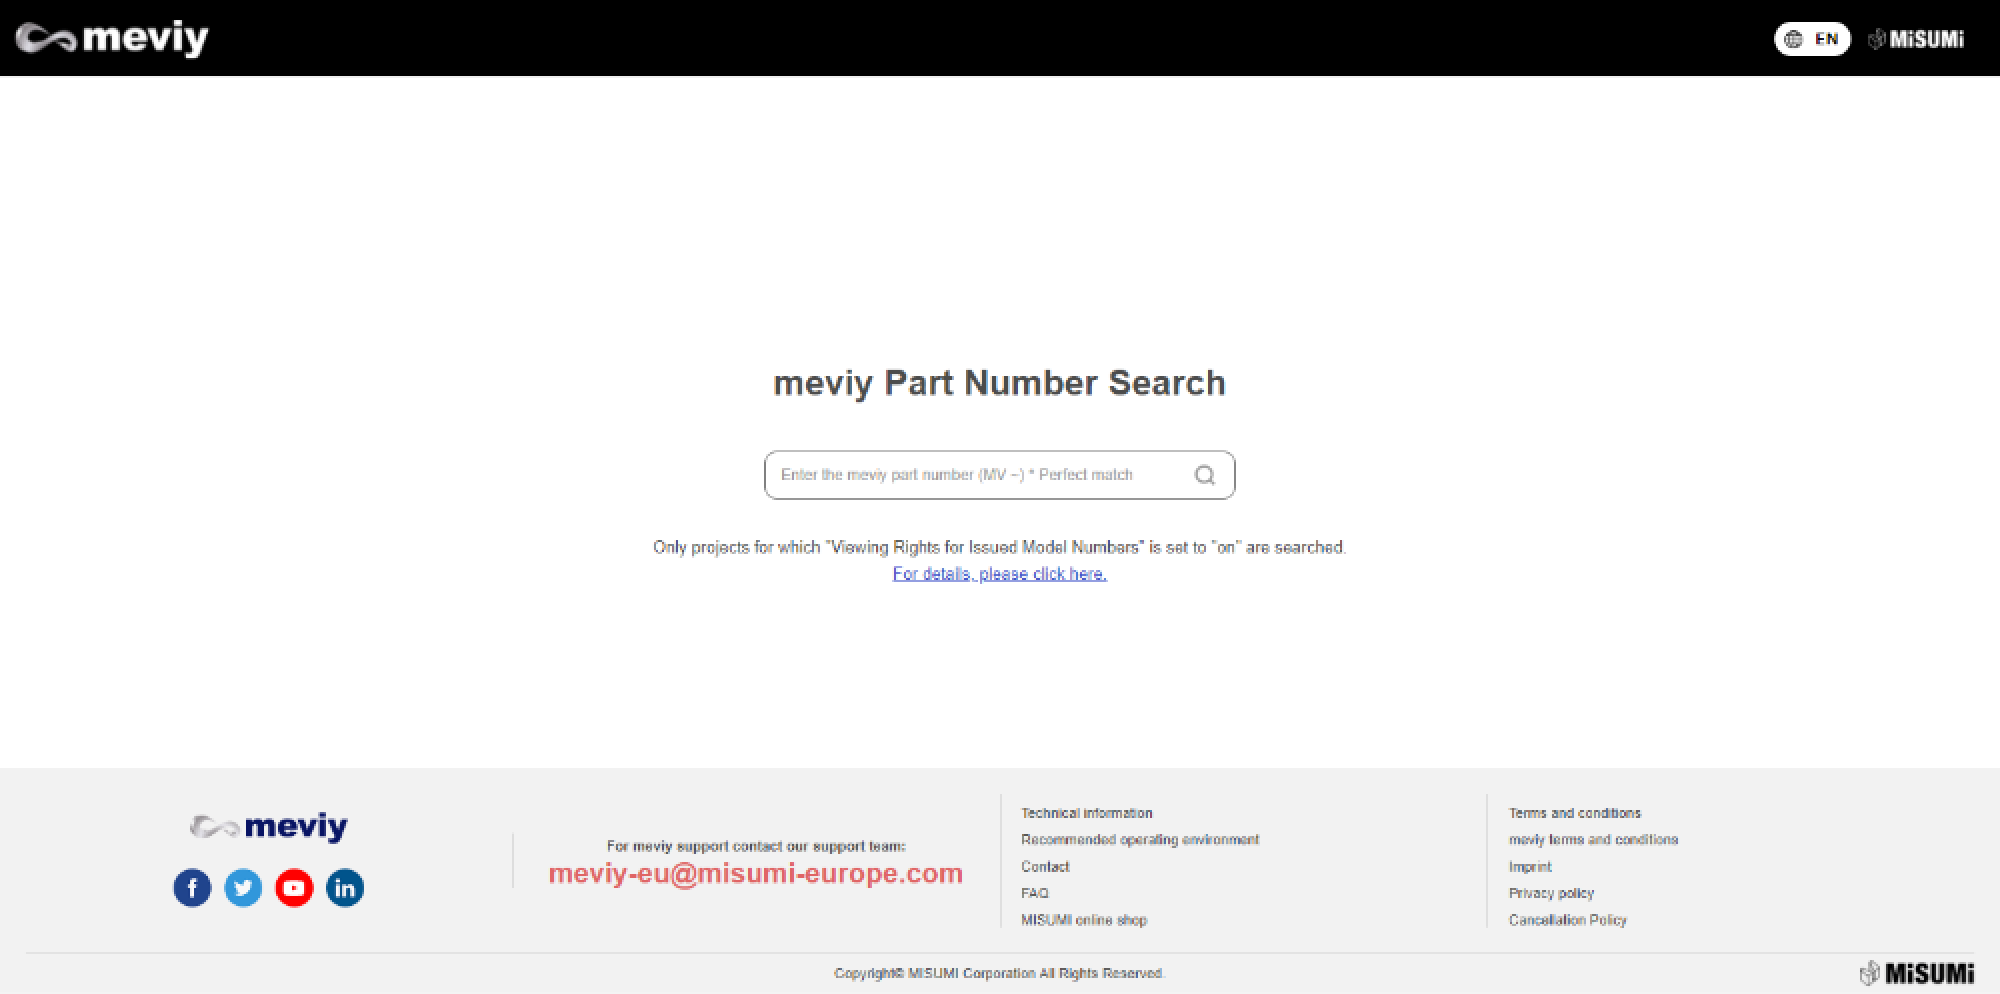 meviy Part Number Search screen